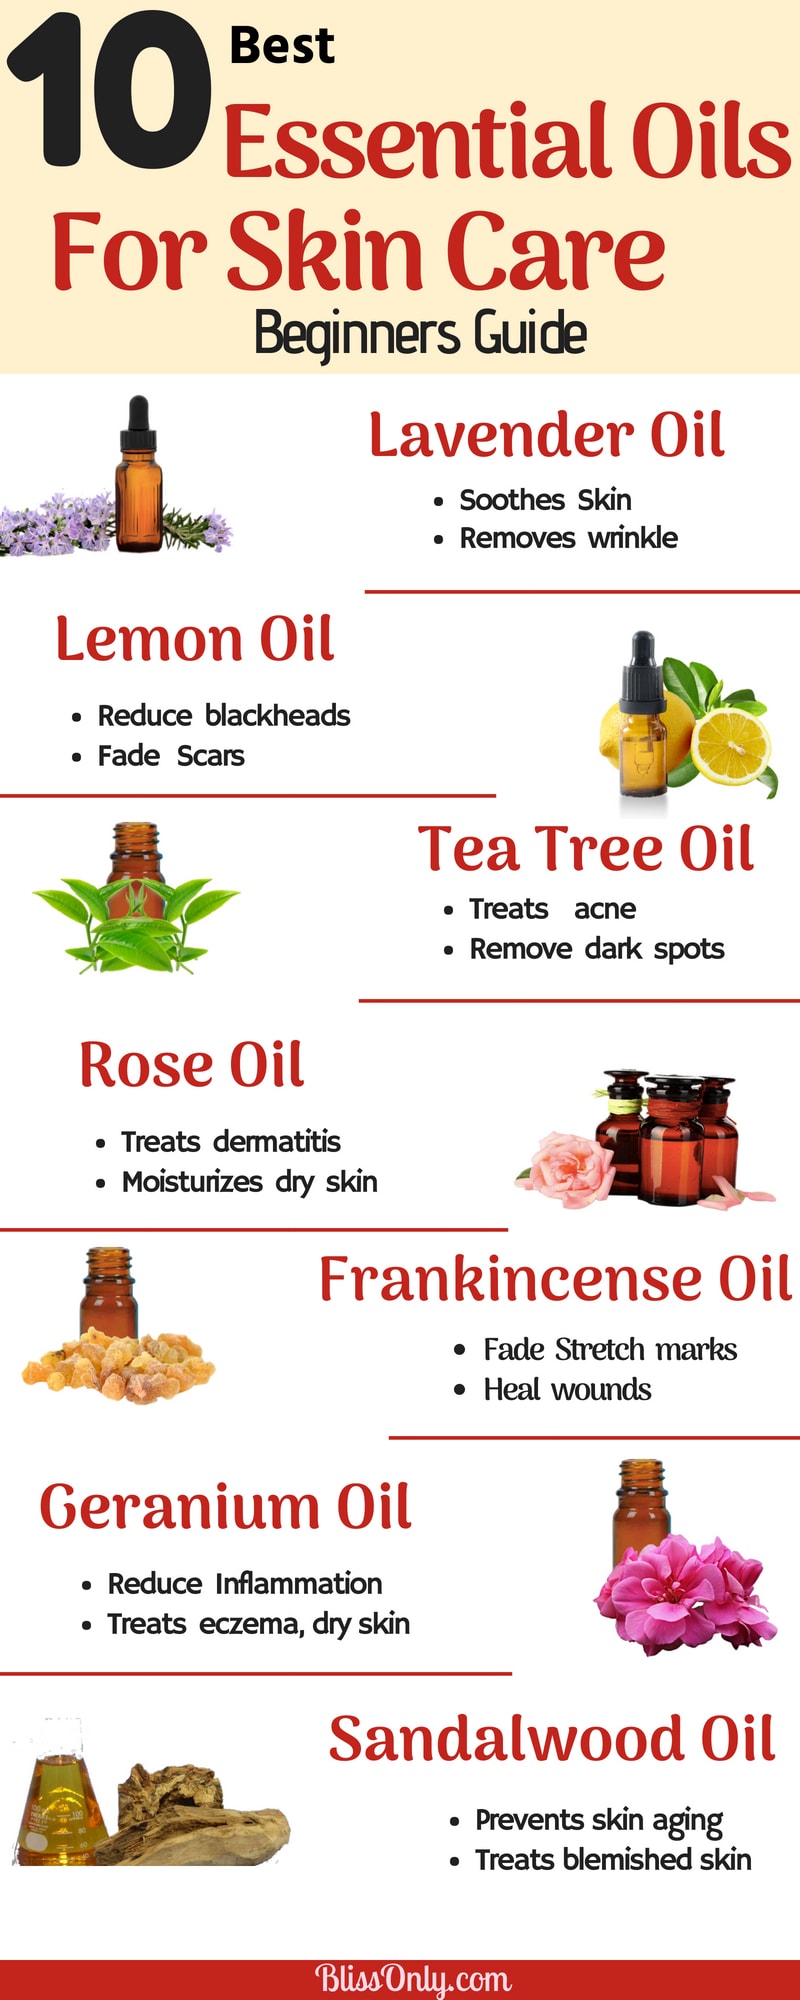 10 Best Essential Oils For Skin Care And How To Use Them - BlissOnly